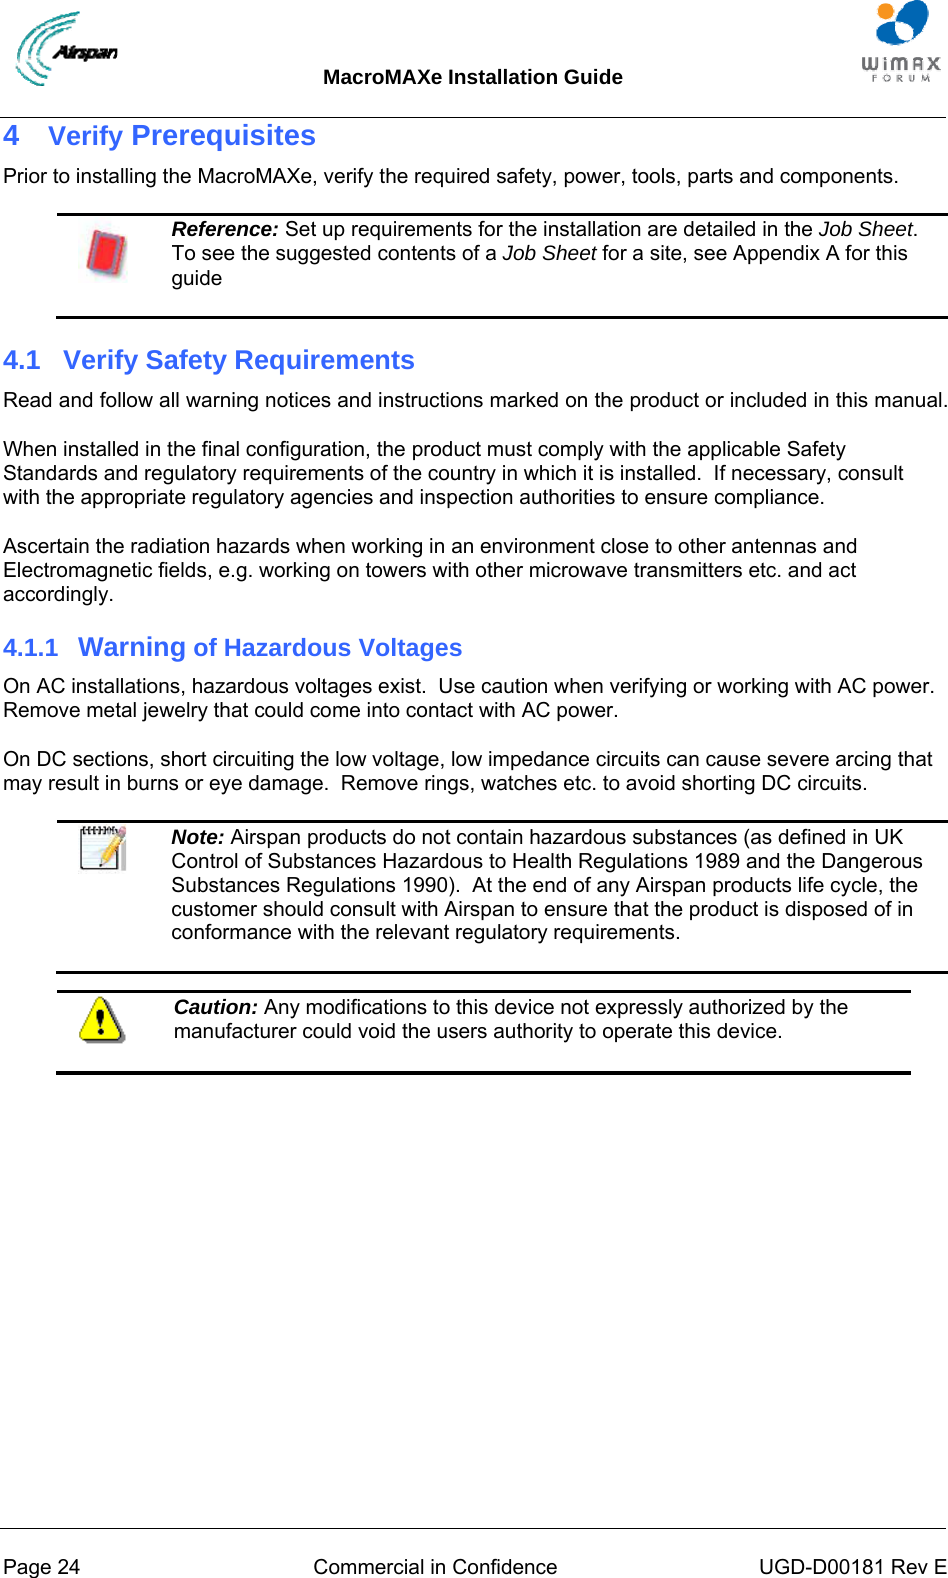 MacroMAXe Installation Guide  Page 24  Commercial in Confidence  UGD-D00181 Rev E 4  Verify Prerequisites Prior to installing the MacroMAXe, verify the required safety, power, tools, parts and components.  Reference: Set up requirements for the installation are detailed in the Job Sheet.  To see the suggested contents of a Job Sheet for a site, see Appendix A for this guide 4.1  Verify Safety Requirements Read and follow all warning notices and instructions marked on the product or included in this manual. When installed in the final configuration, the product must comply with the applicable Safety Standards and regulatory requirements of the country in which it is installed.  If necessary, consult with the appropriate regulatory agencies and inspection authorities to ensure compliance. Ascertain the radiation hazards when working in an environment close to other antennas and Electromagnetic fields, e.g. working on towers with other microwave transmitters etc. and act accordingly. 4.1.1  Warning of Hazardous Voltages On AC installations, hazardous voltages exist.  Use caution when verifying or working with AC power.  Remove metal jewelry that could come into contact with AC power. On DC sections, short circuiting the low voltage, low impedance circuits can cause severe arcing that may result in burns or eye damage.  Remove rings, watches etc. to avoid shorting DC circuits.   Note: Airspan products do not contain hazardous substances (as defined in UK Control of Substances Hazardous to Health Regulations 1989 and the Dangerous Substances Regulations 1990).  At the end of any Airspan products life cycle, the customer should consult with Airspan to ensure that the product is disposed of in conformance with the relevant regulatory requirements.   Caution: Any modifications to this device not expressly authorized by the manufacturer could void the users authority to operate this device.  